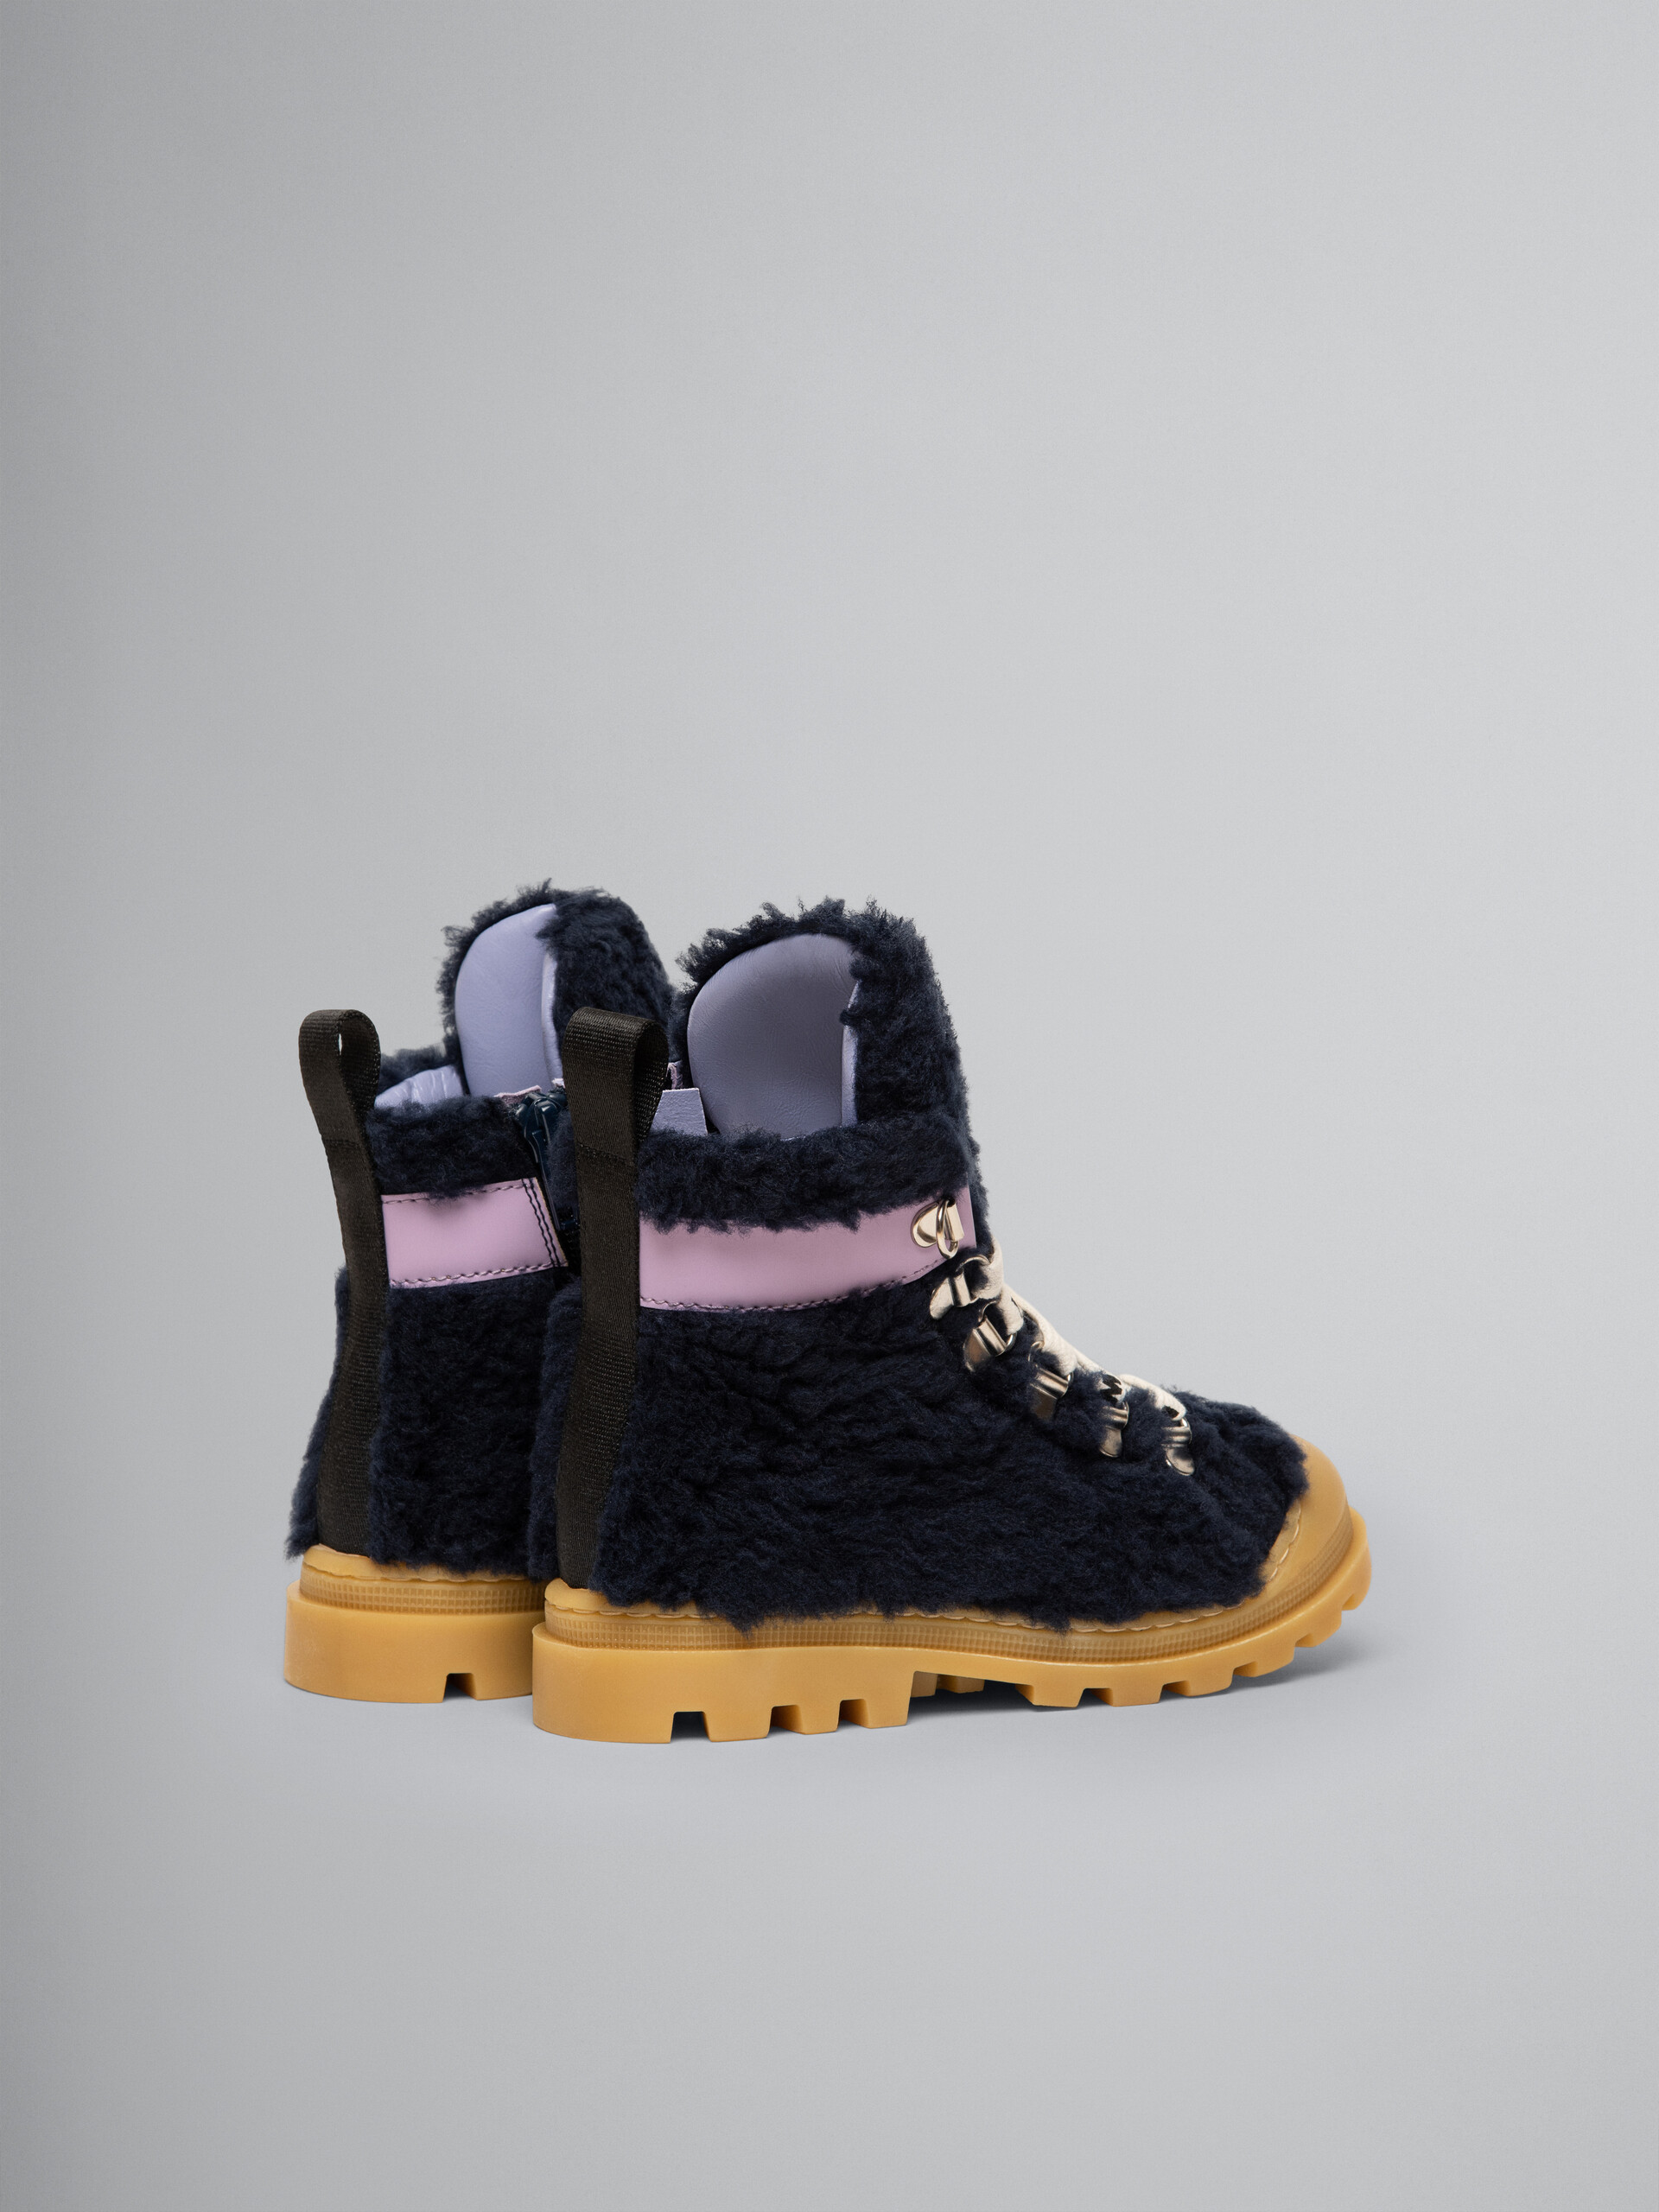 Black mountain boot - Other accessories - Image 3